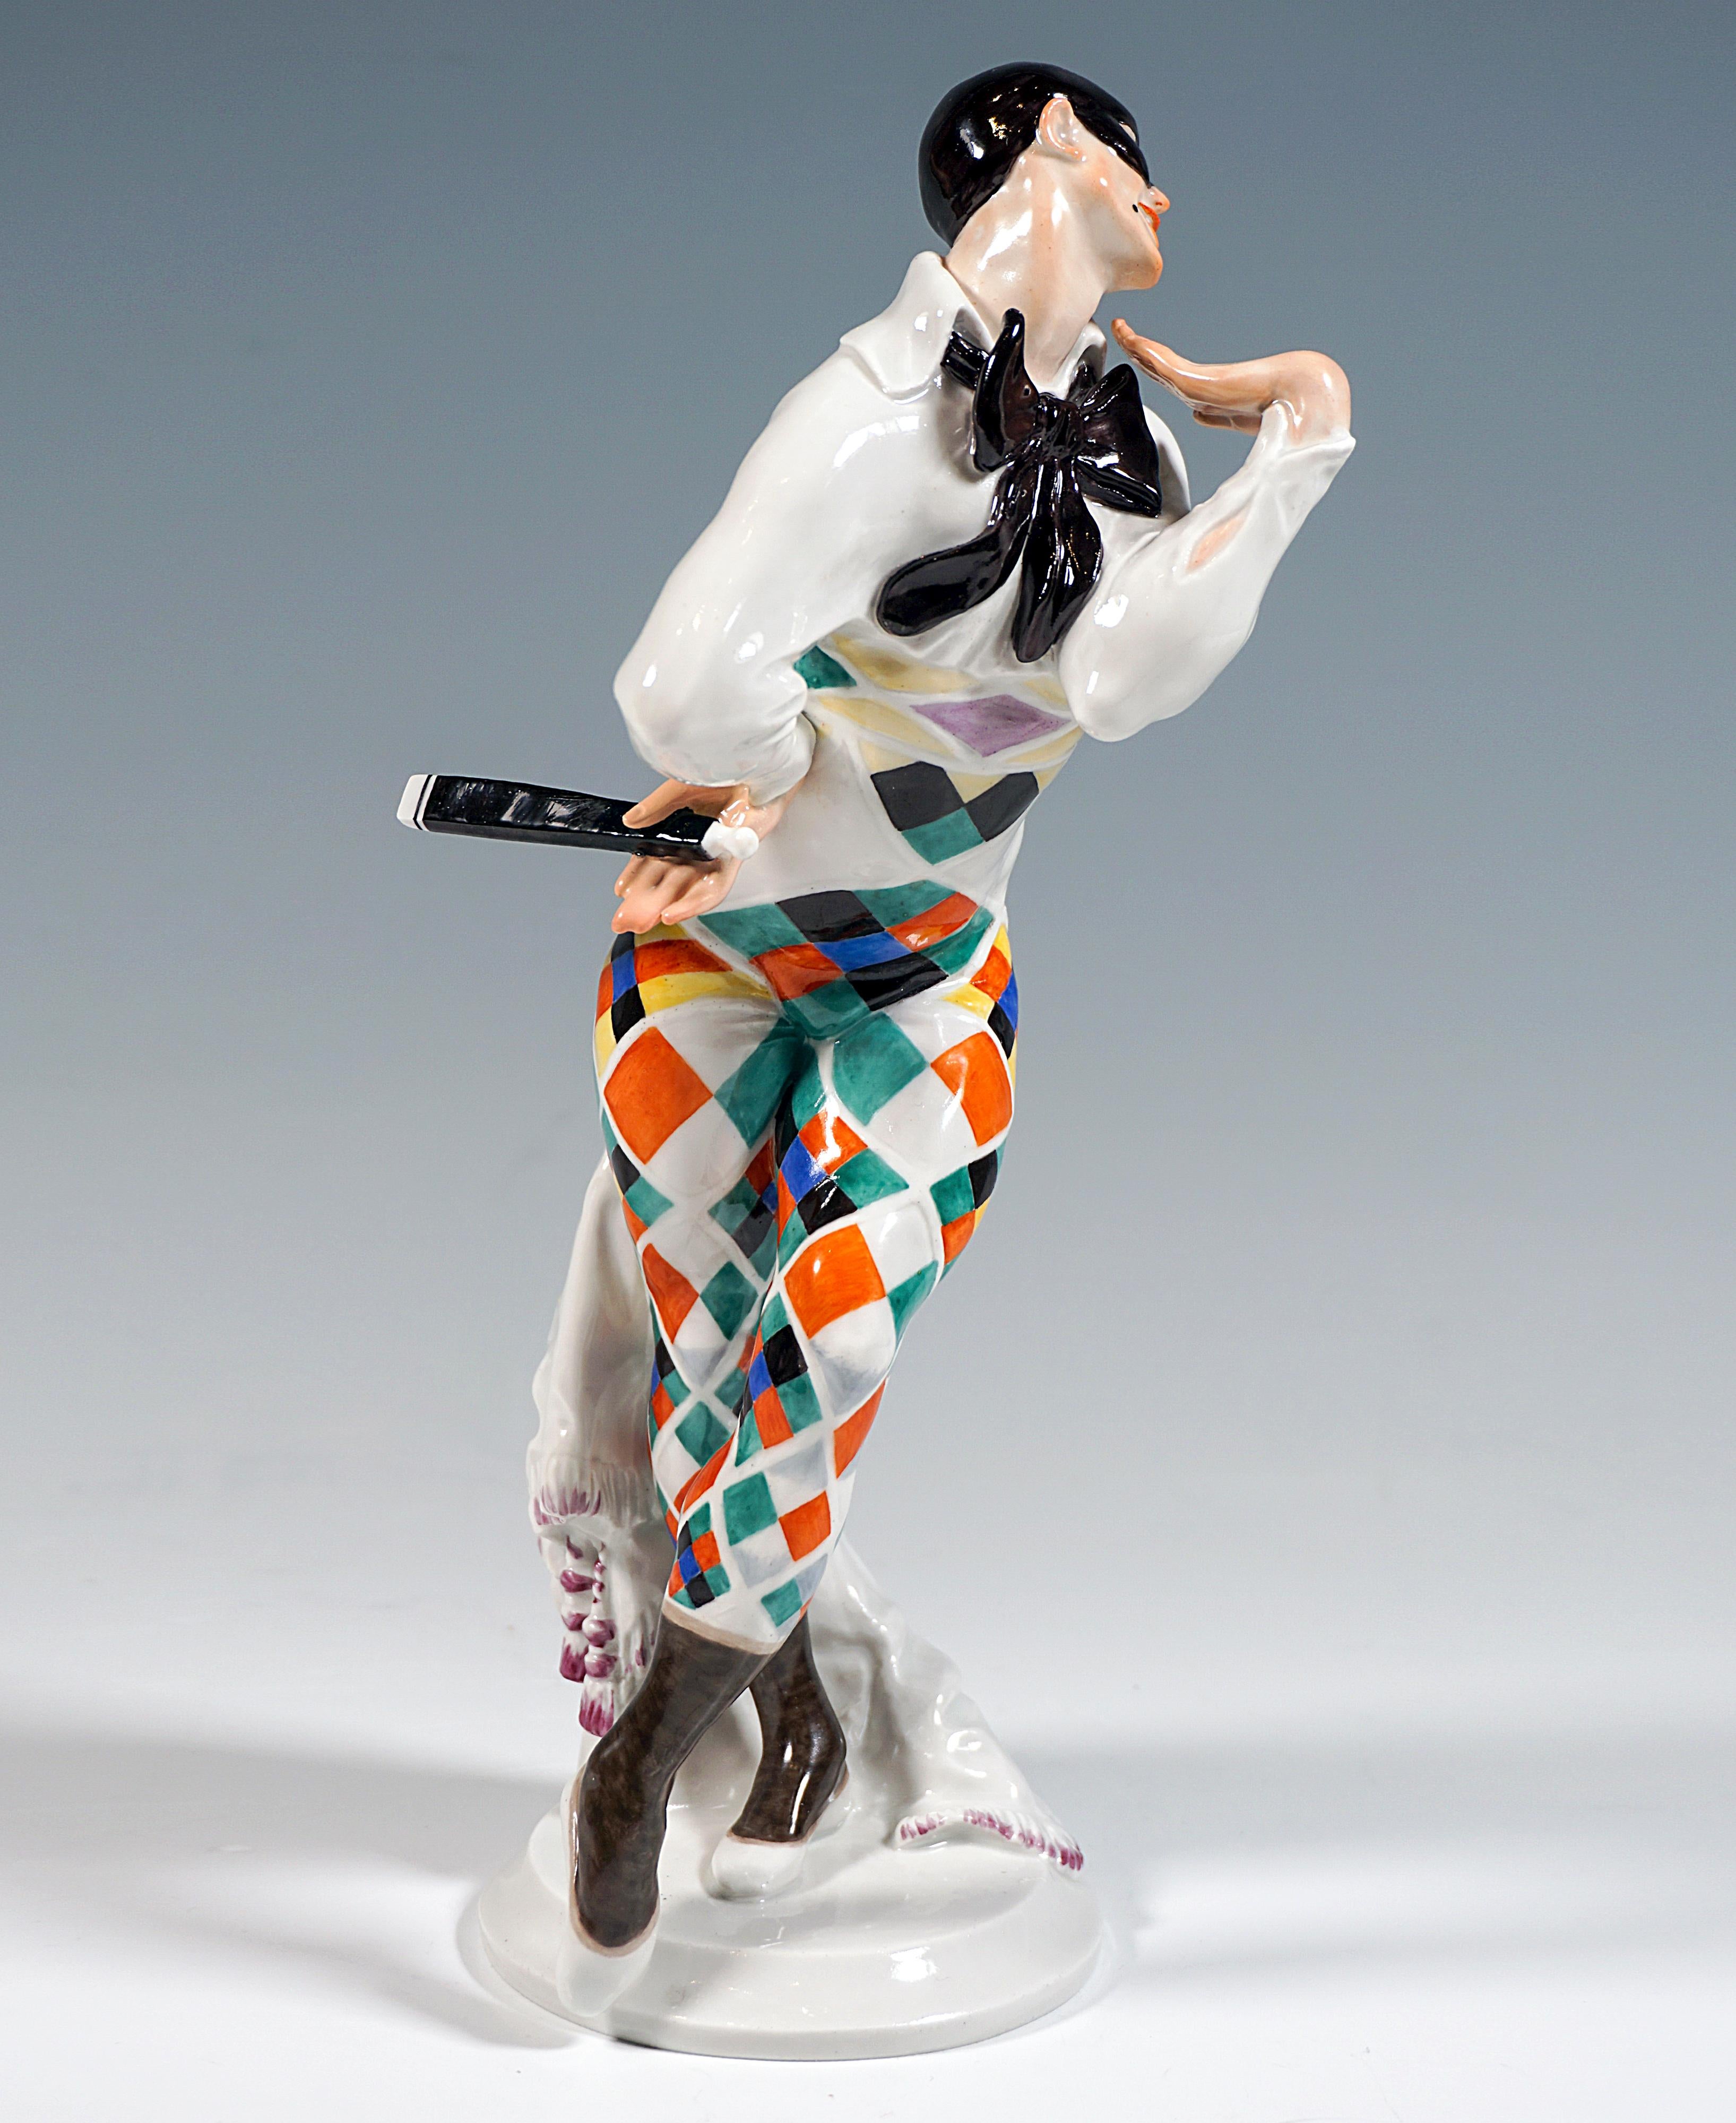 Hand-Crafted Meissen Figurine 'Bajazzo', Russian Ballet 'Carnival', by Paul Scheurich, 20th For Sale